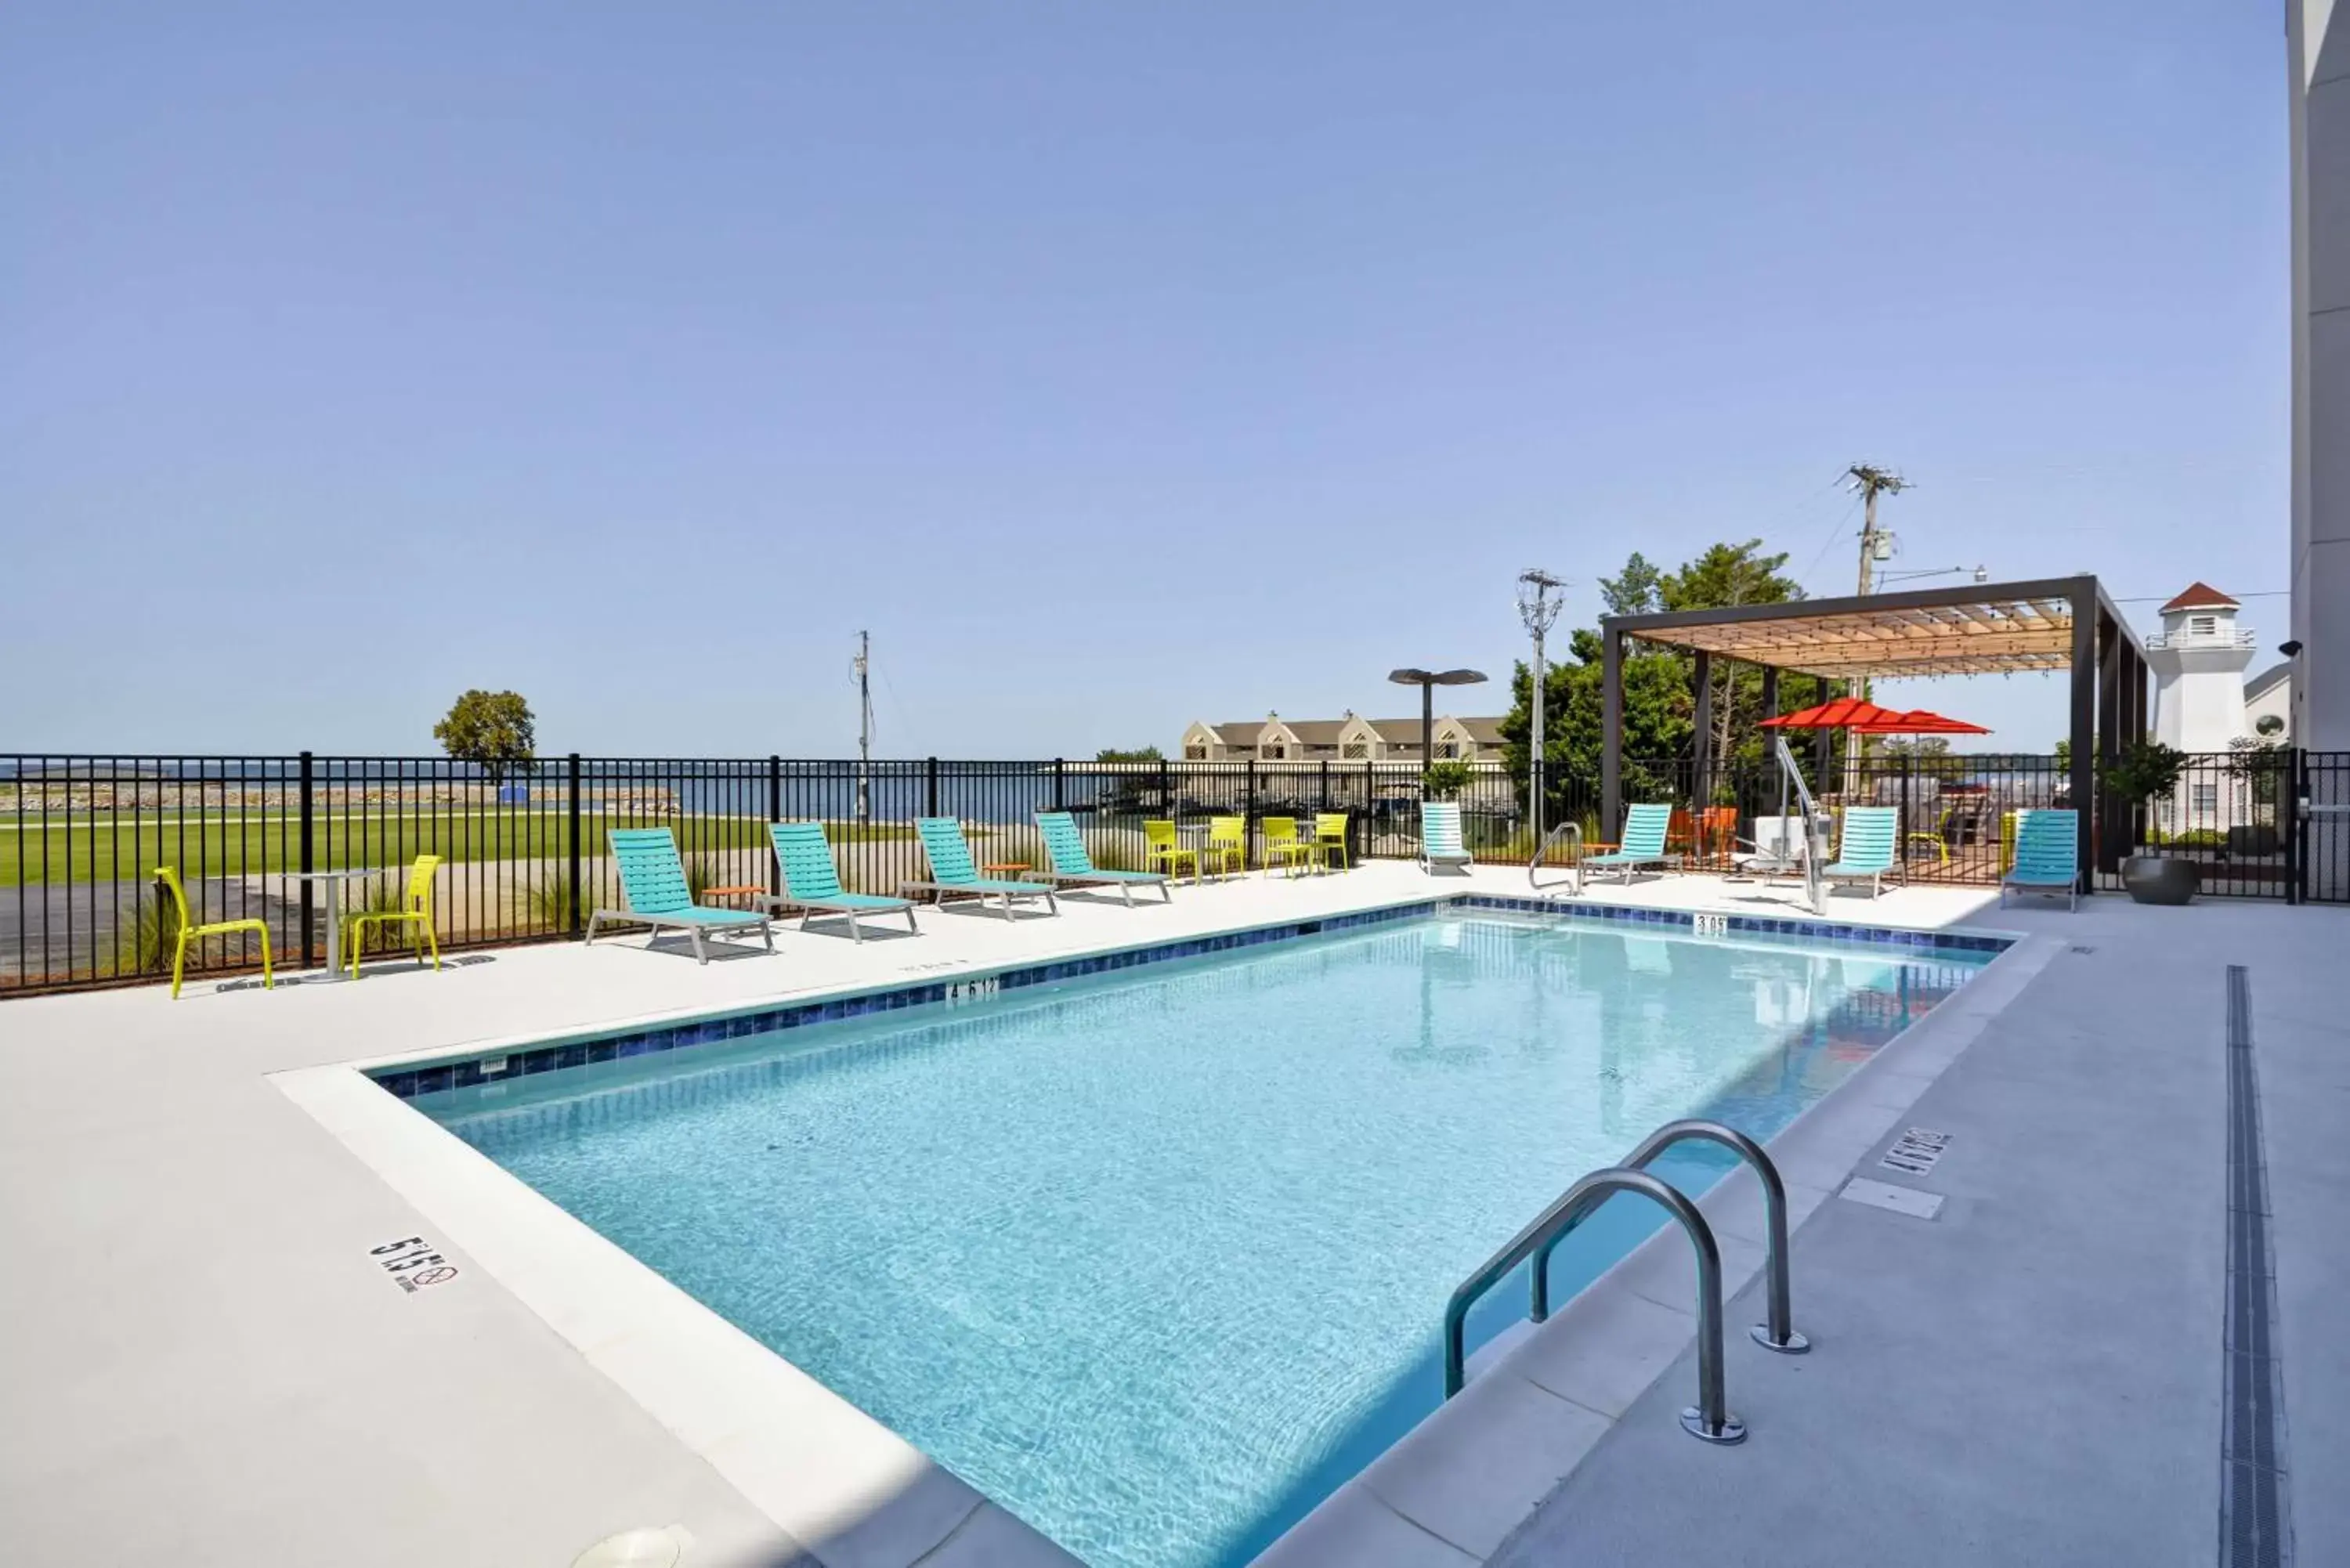 Swimming Pool in Home2 Suites By Hilton Decatur Ingalls Harbor